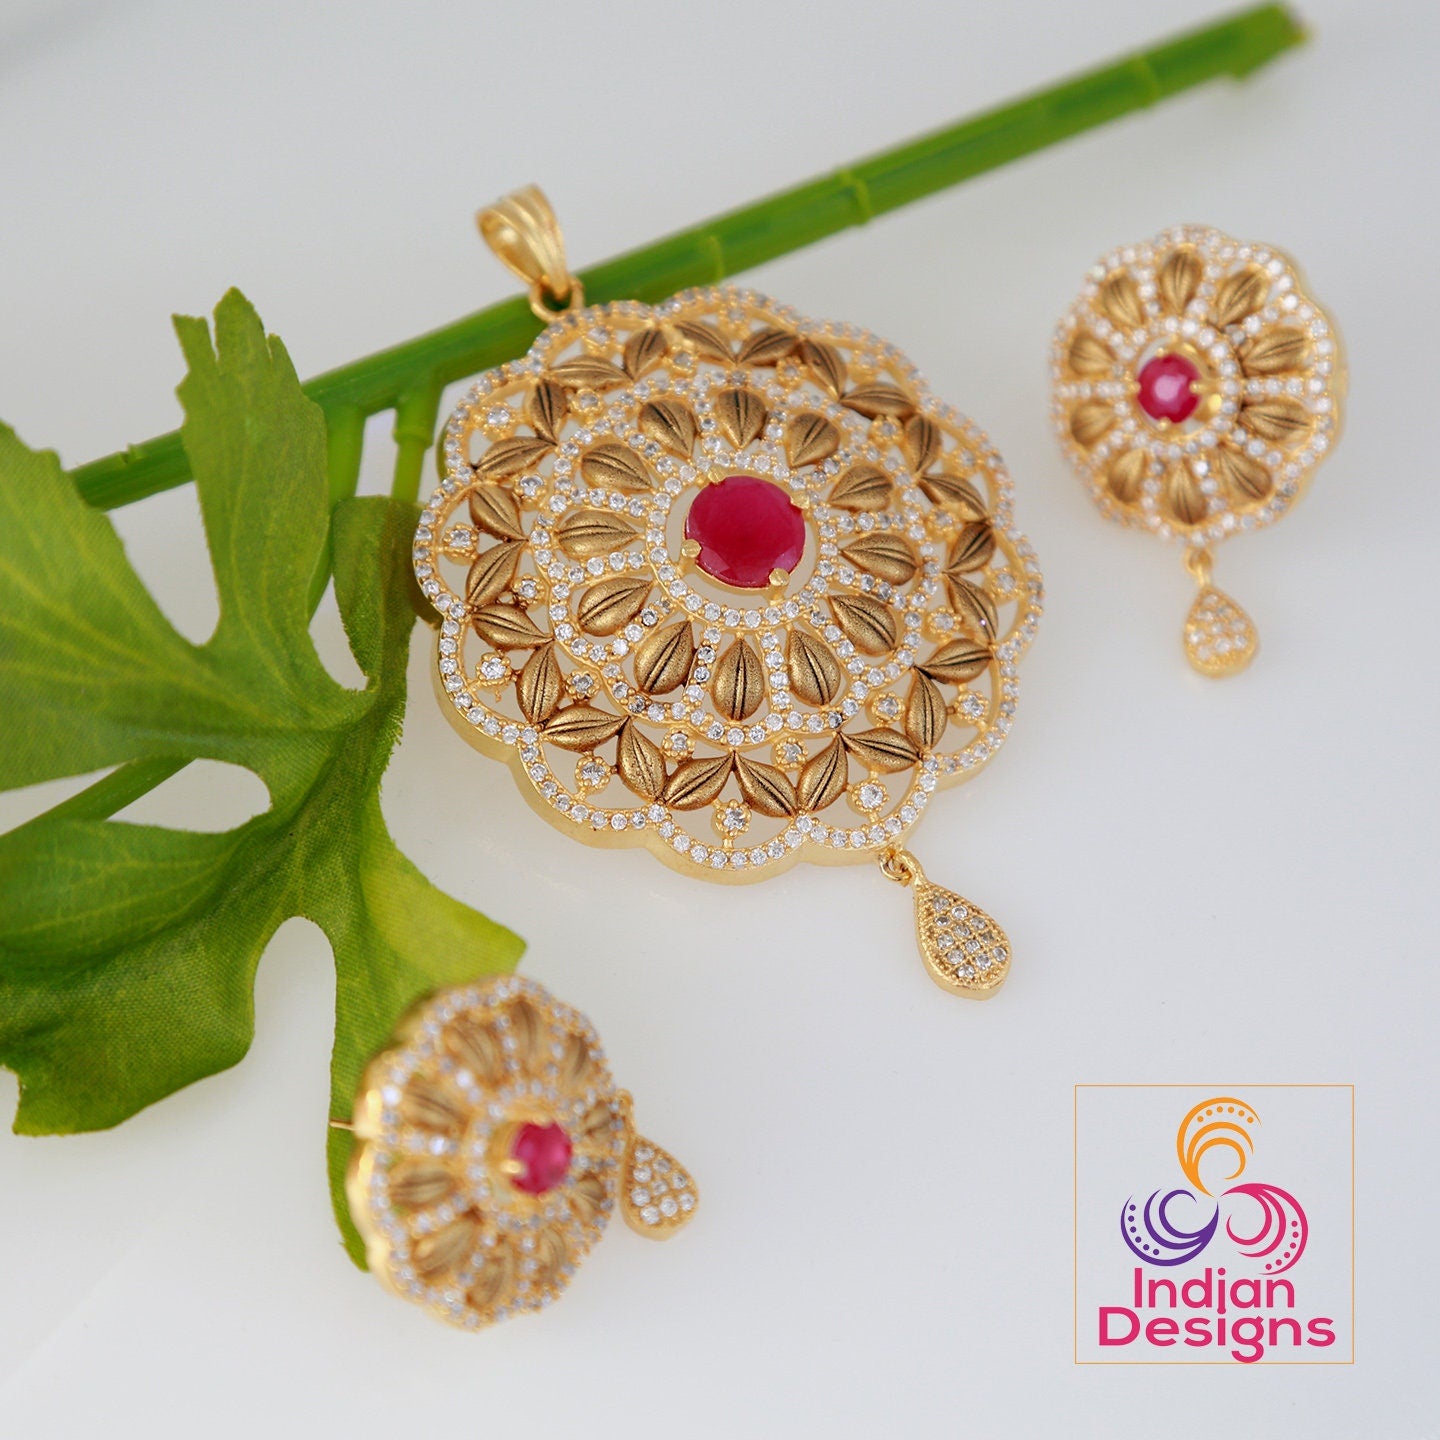 Floral art pendant | American Diamond Pendant Set with Ruby Emerald and White Stones | Matte Finish Gold plated pendant set | Indian jewelry